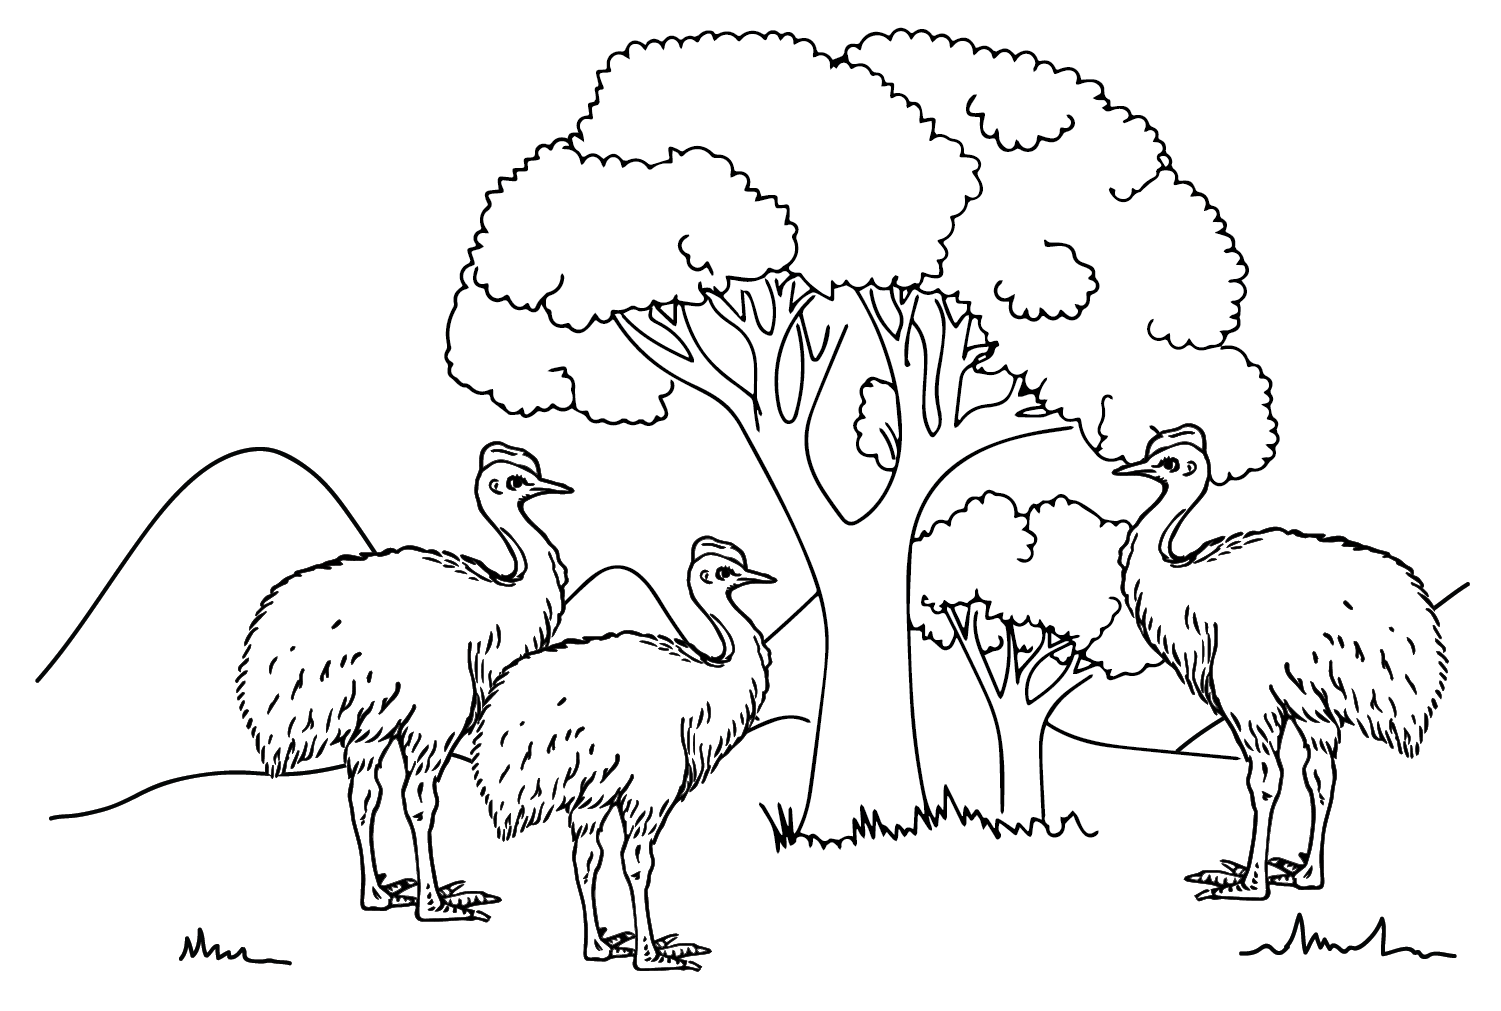 Cassowary Coloring Page Images from Cassowary